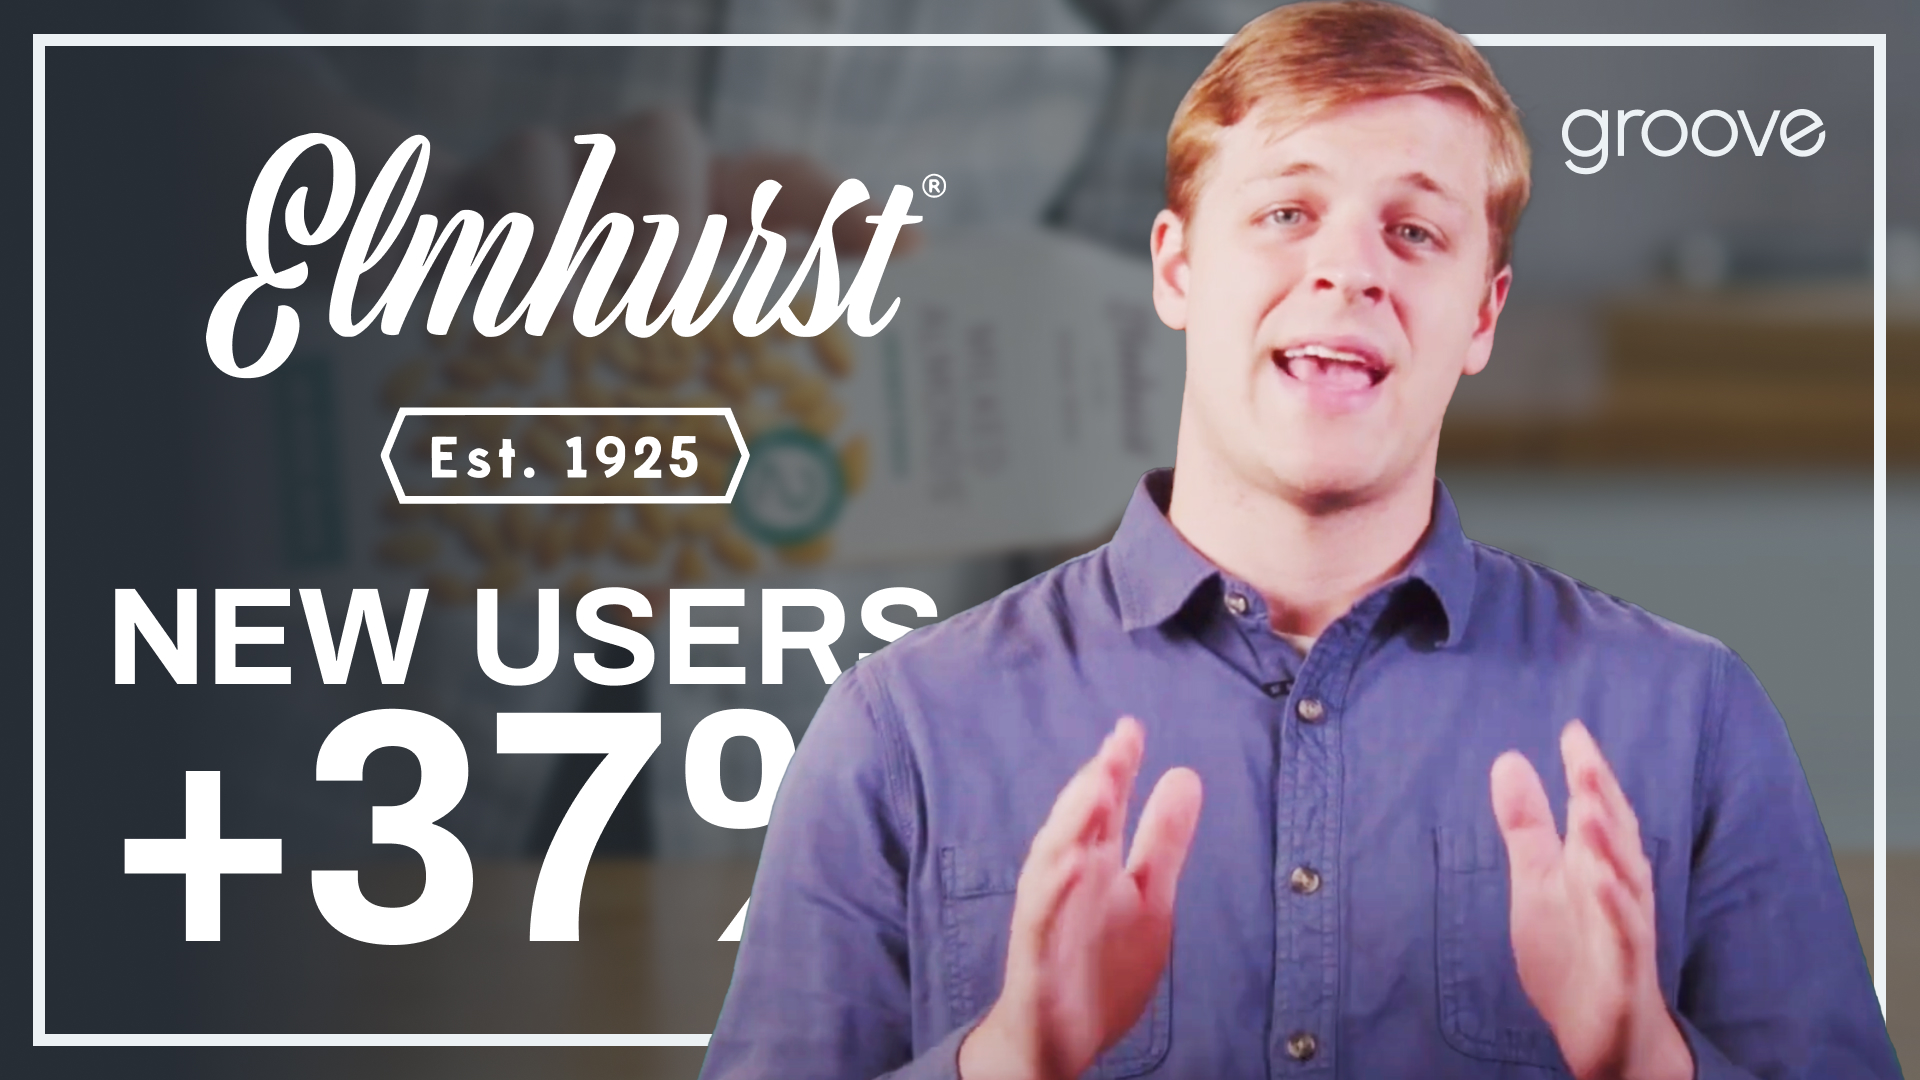 Elmhurst 1925 Increased New Users by +37%